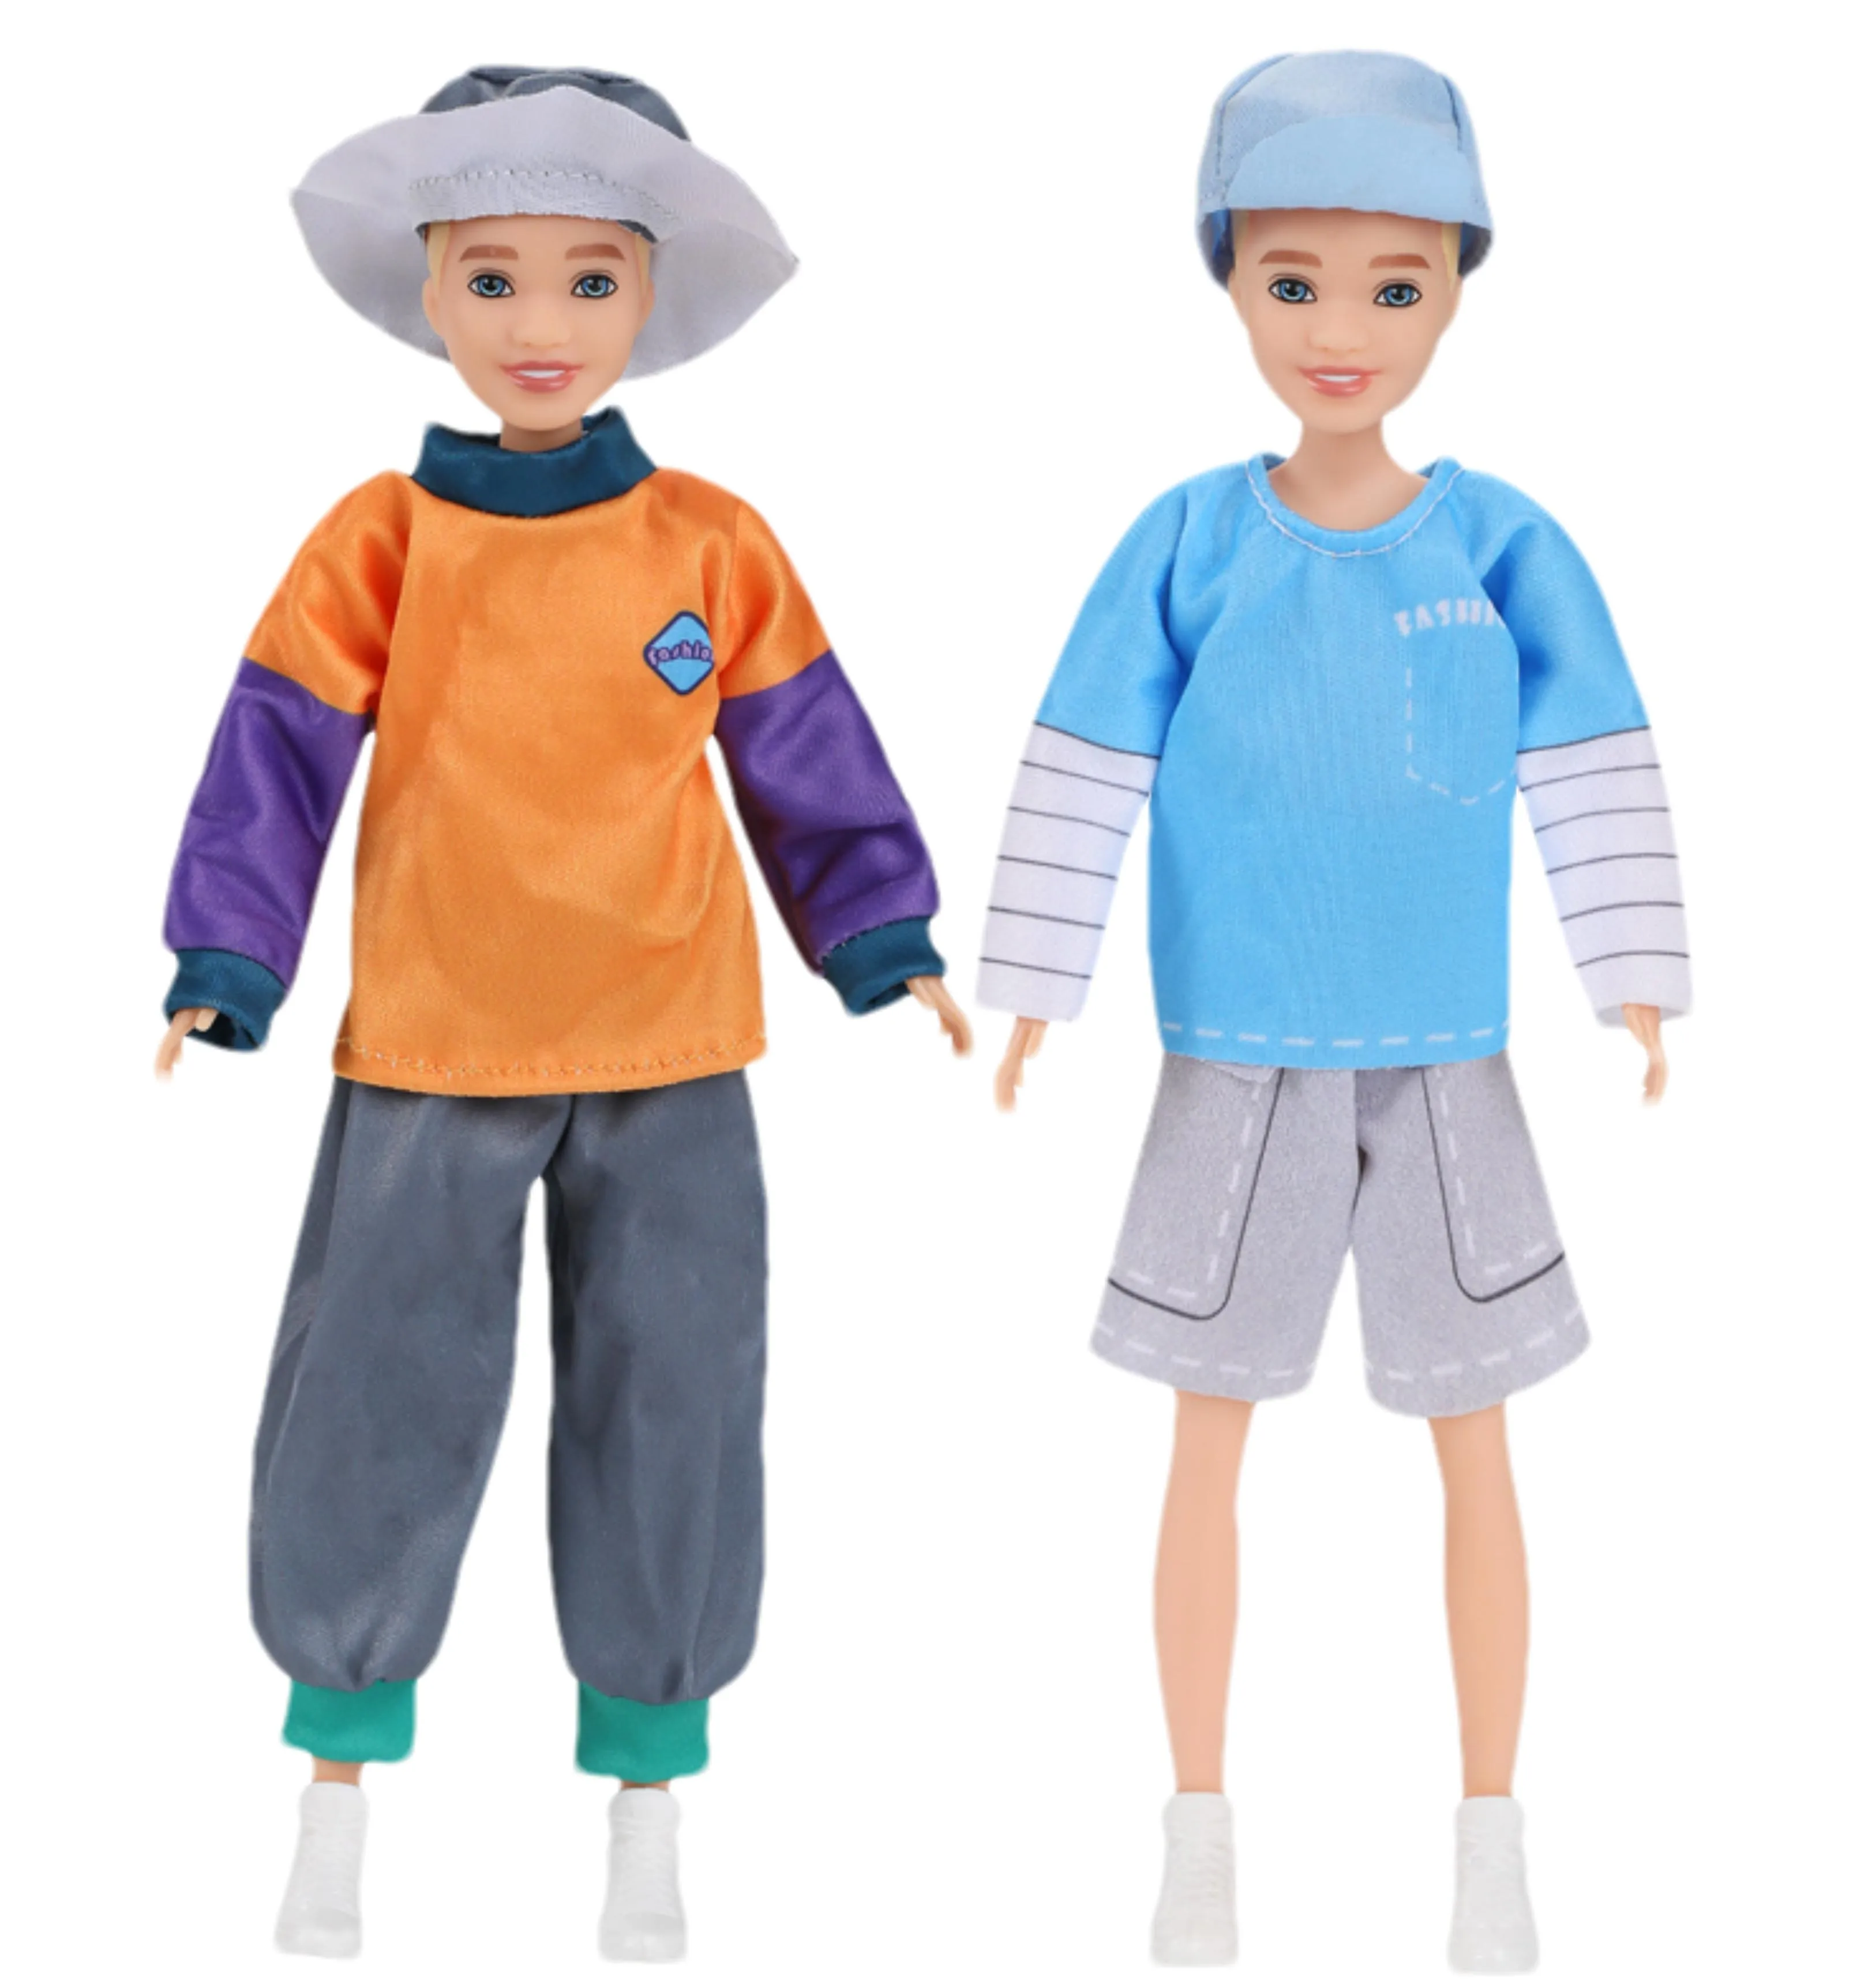 New clothing For American doll's set 23cm men's doll mixed top and pants children's toy mini doll accessories